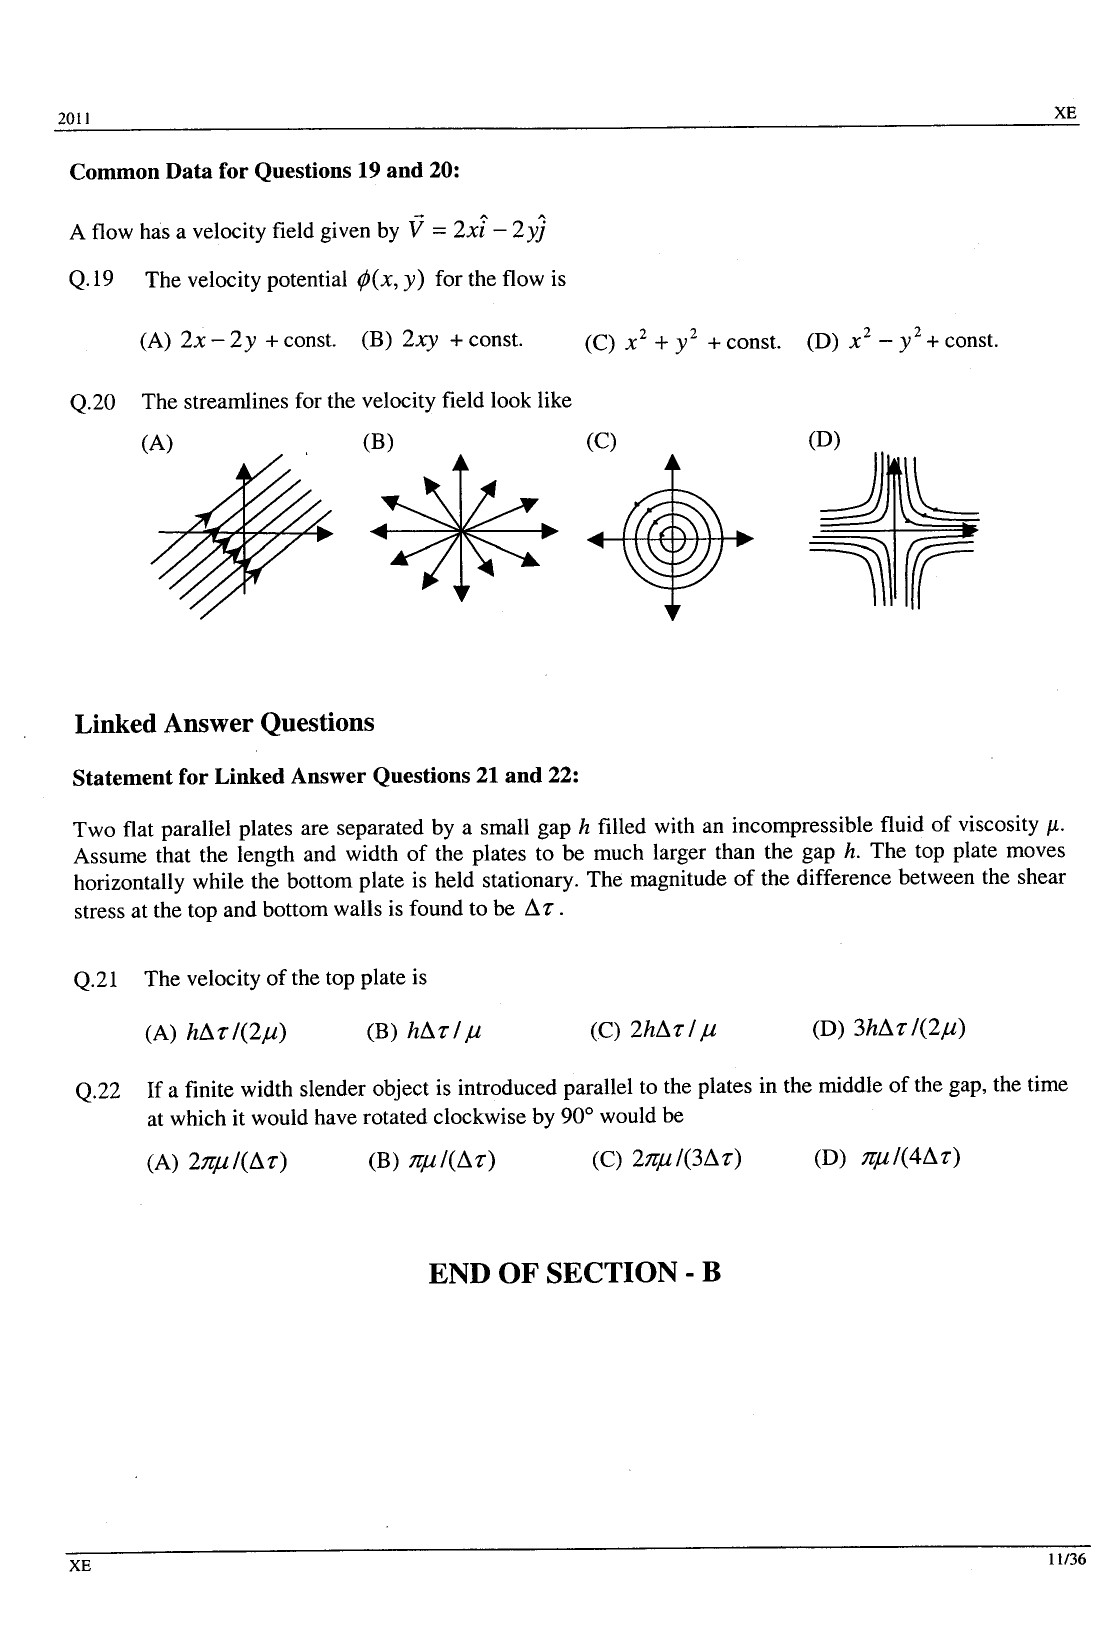 GATE Exam Question Paper 2011 Engineering Sciences 11